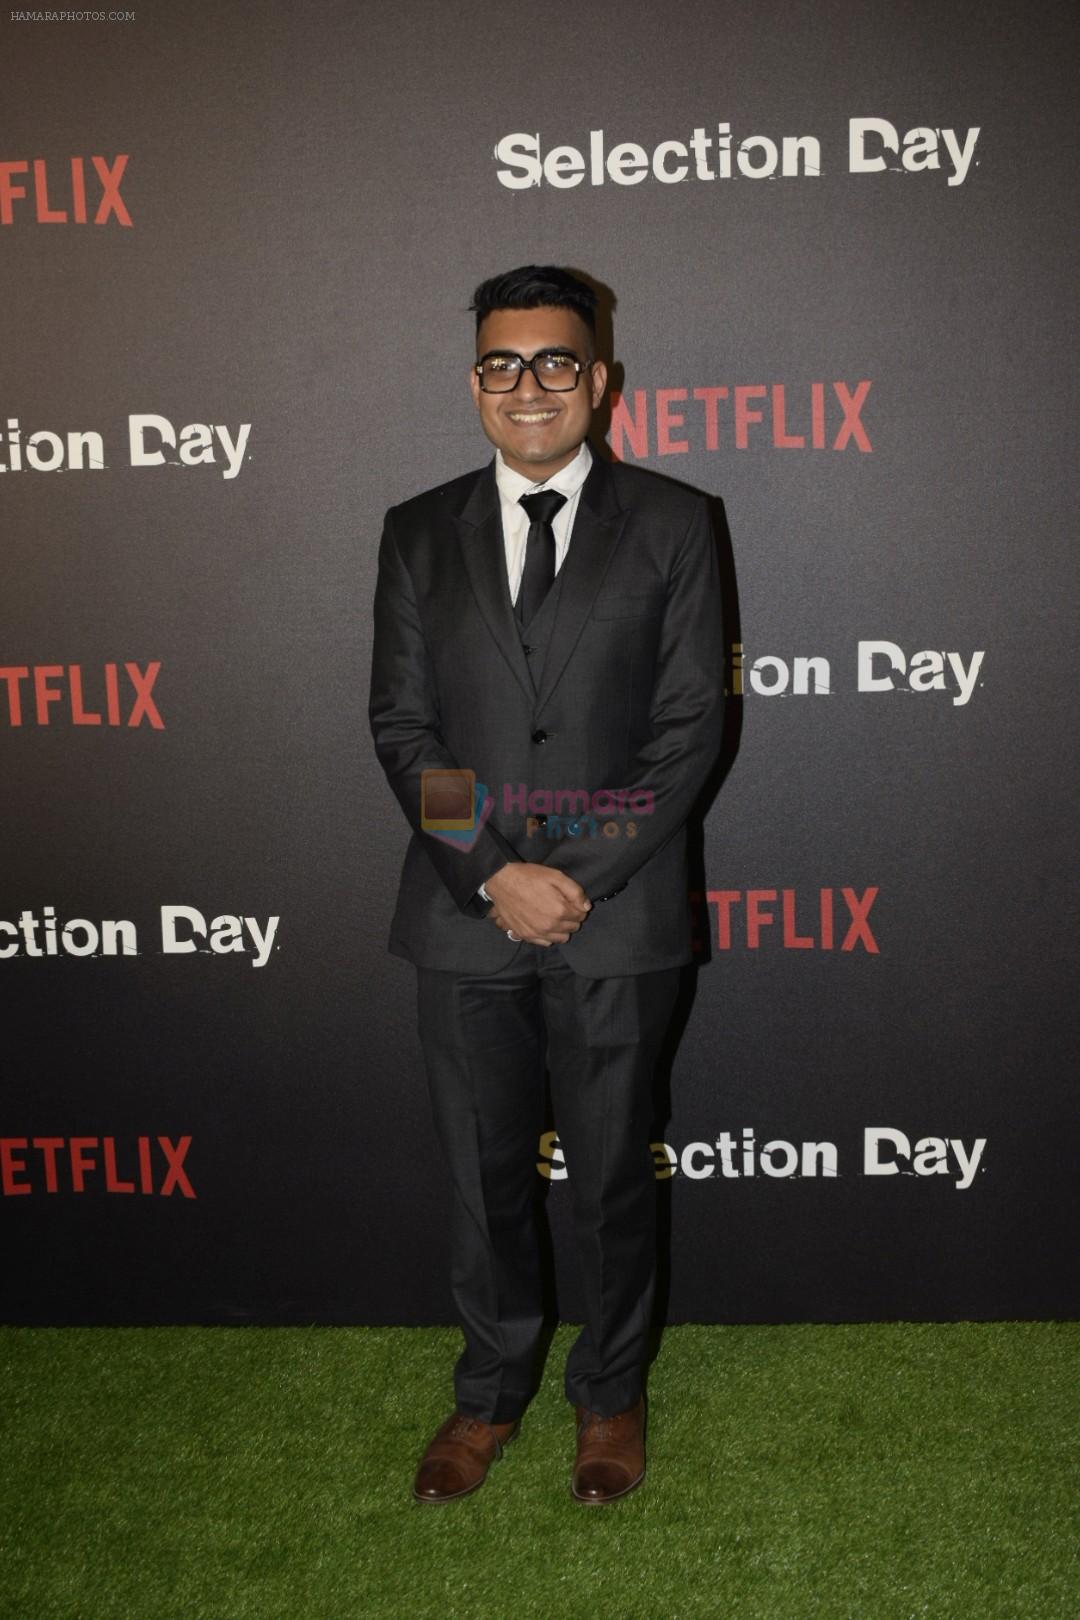 at the Red Carpet of Netfix Upcoming Series Selection Day on 18th Dec 2018